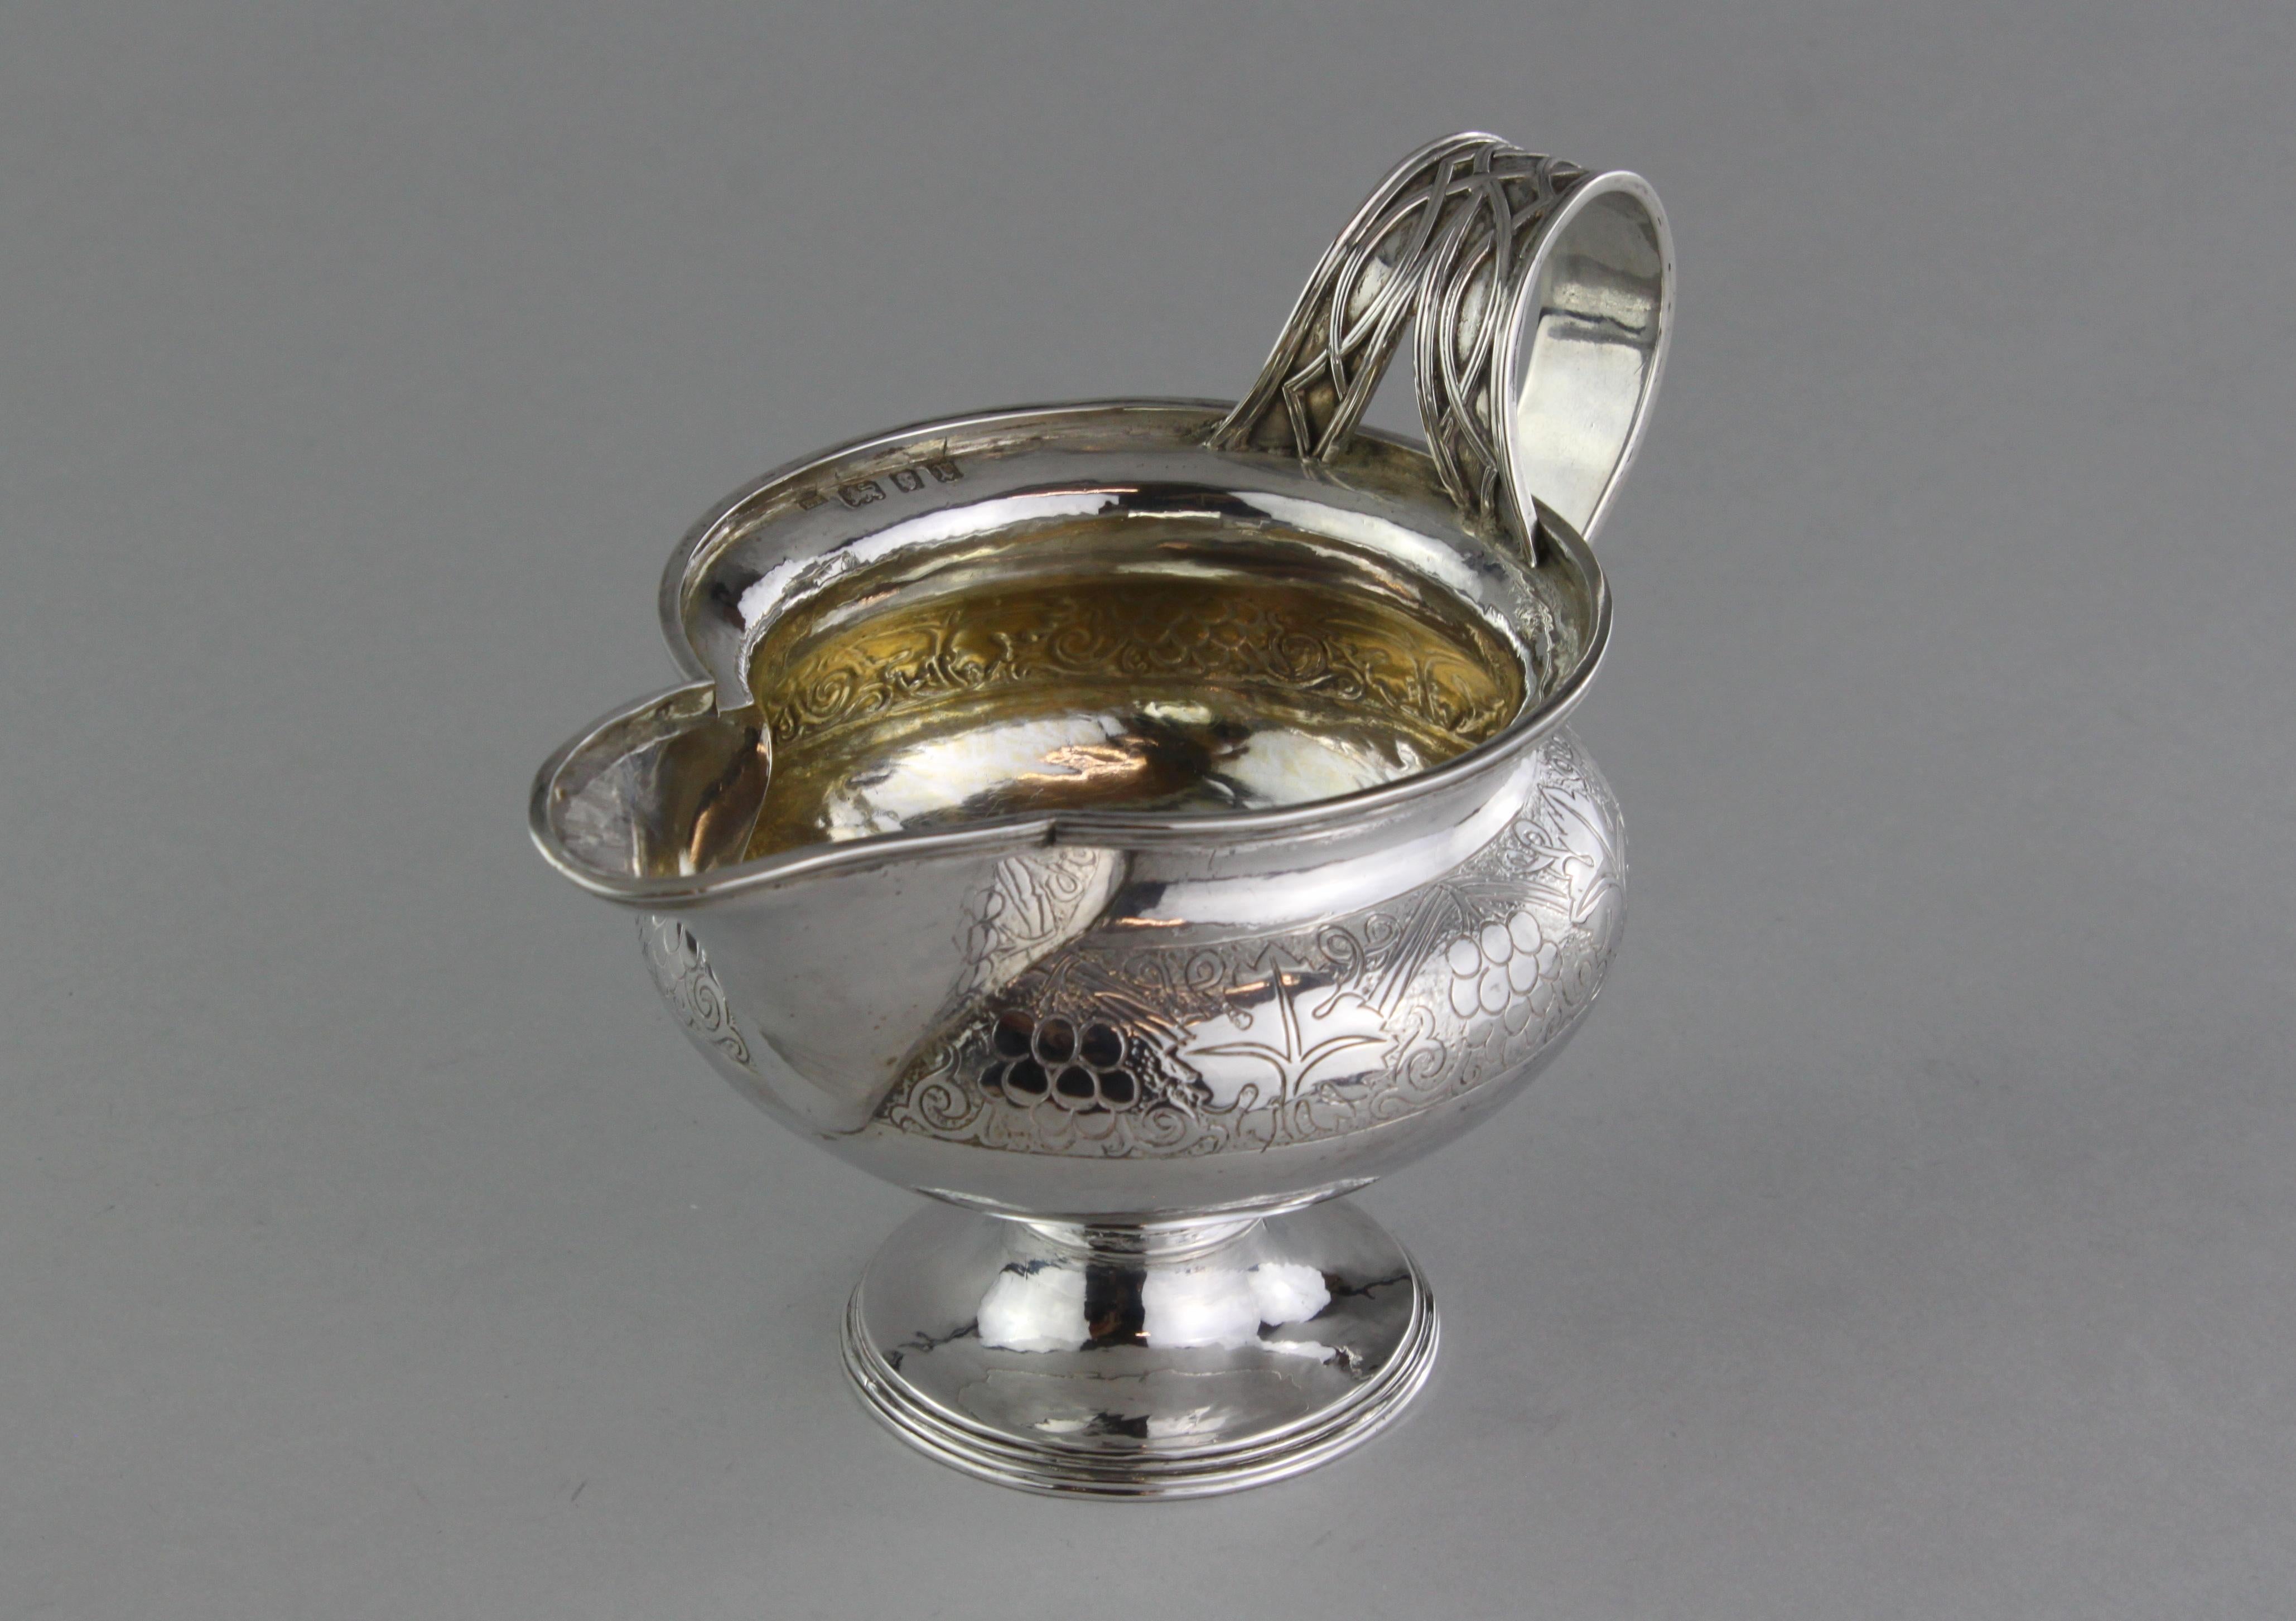 Antique sterling silver cream bowl.
Maker: Edward Farrell
Made in London, 1932
Fully hallmarked.

Dimensions:
Size 17.5 x 10.6 x 12.2 cm
Weight 340 grams

Condition: Cream jar has some surface wear from general usage, no damage, excellent